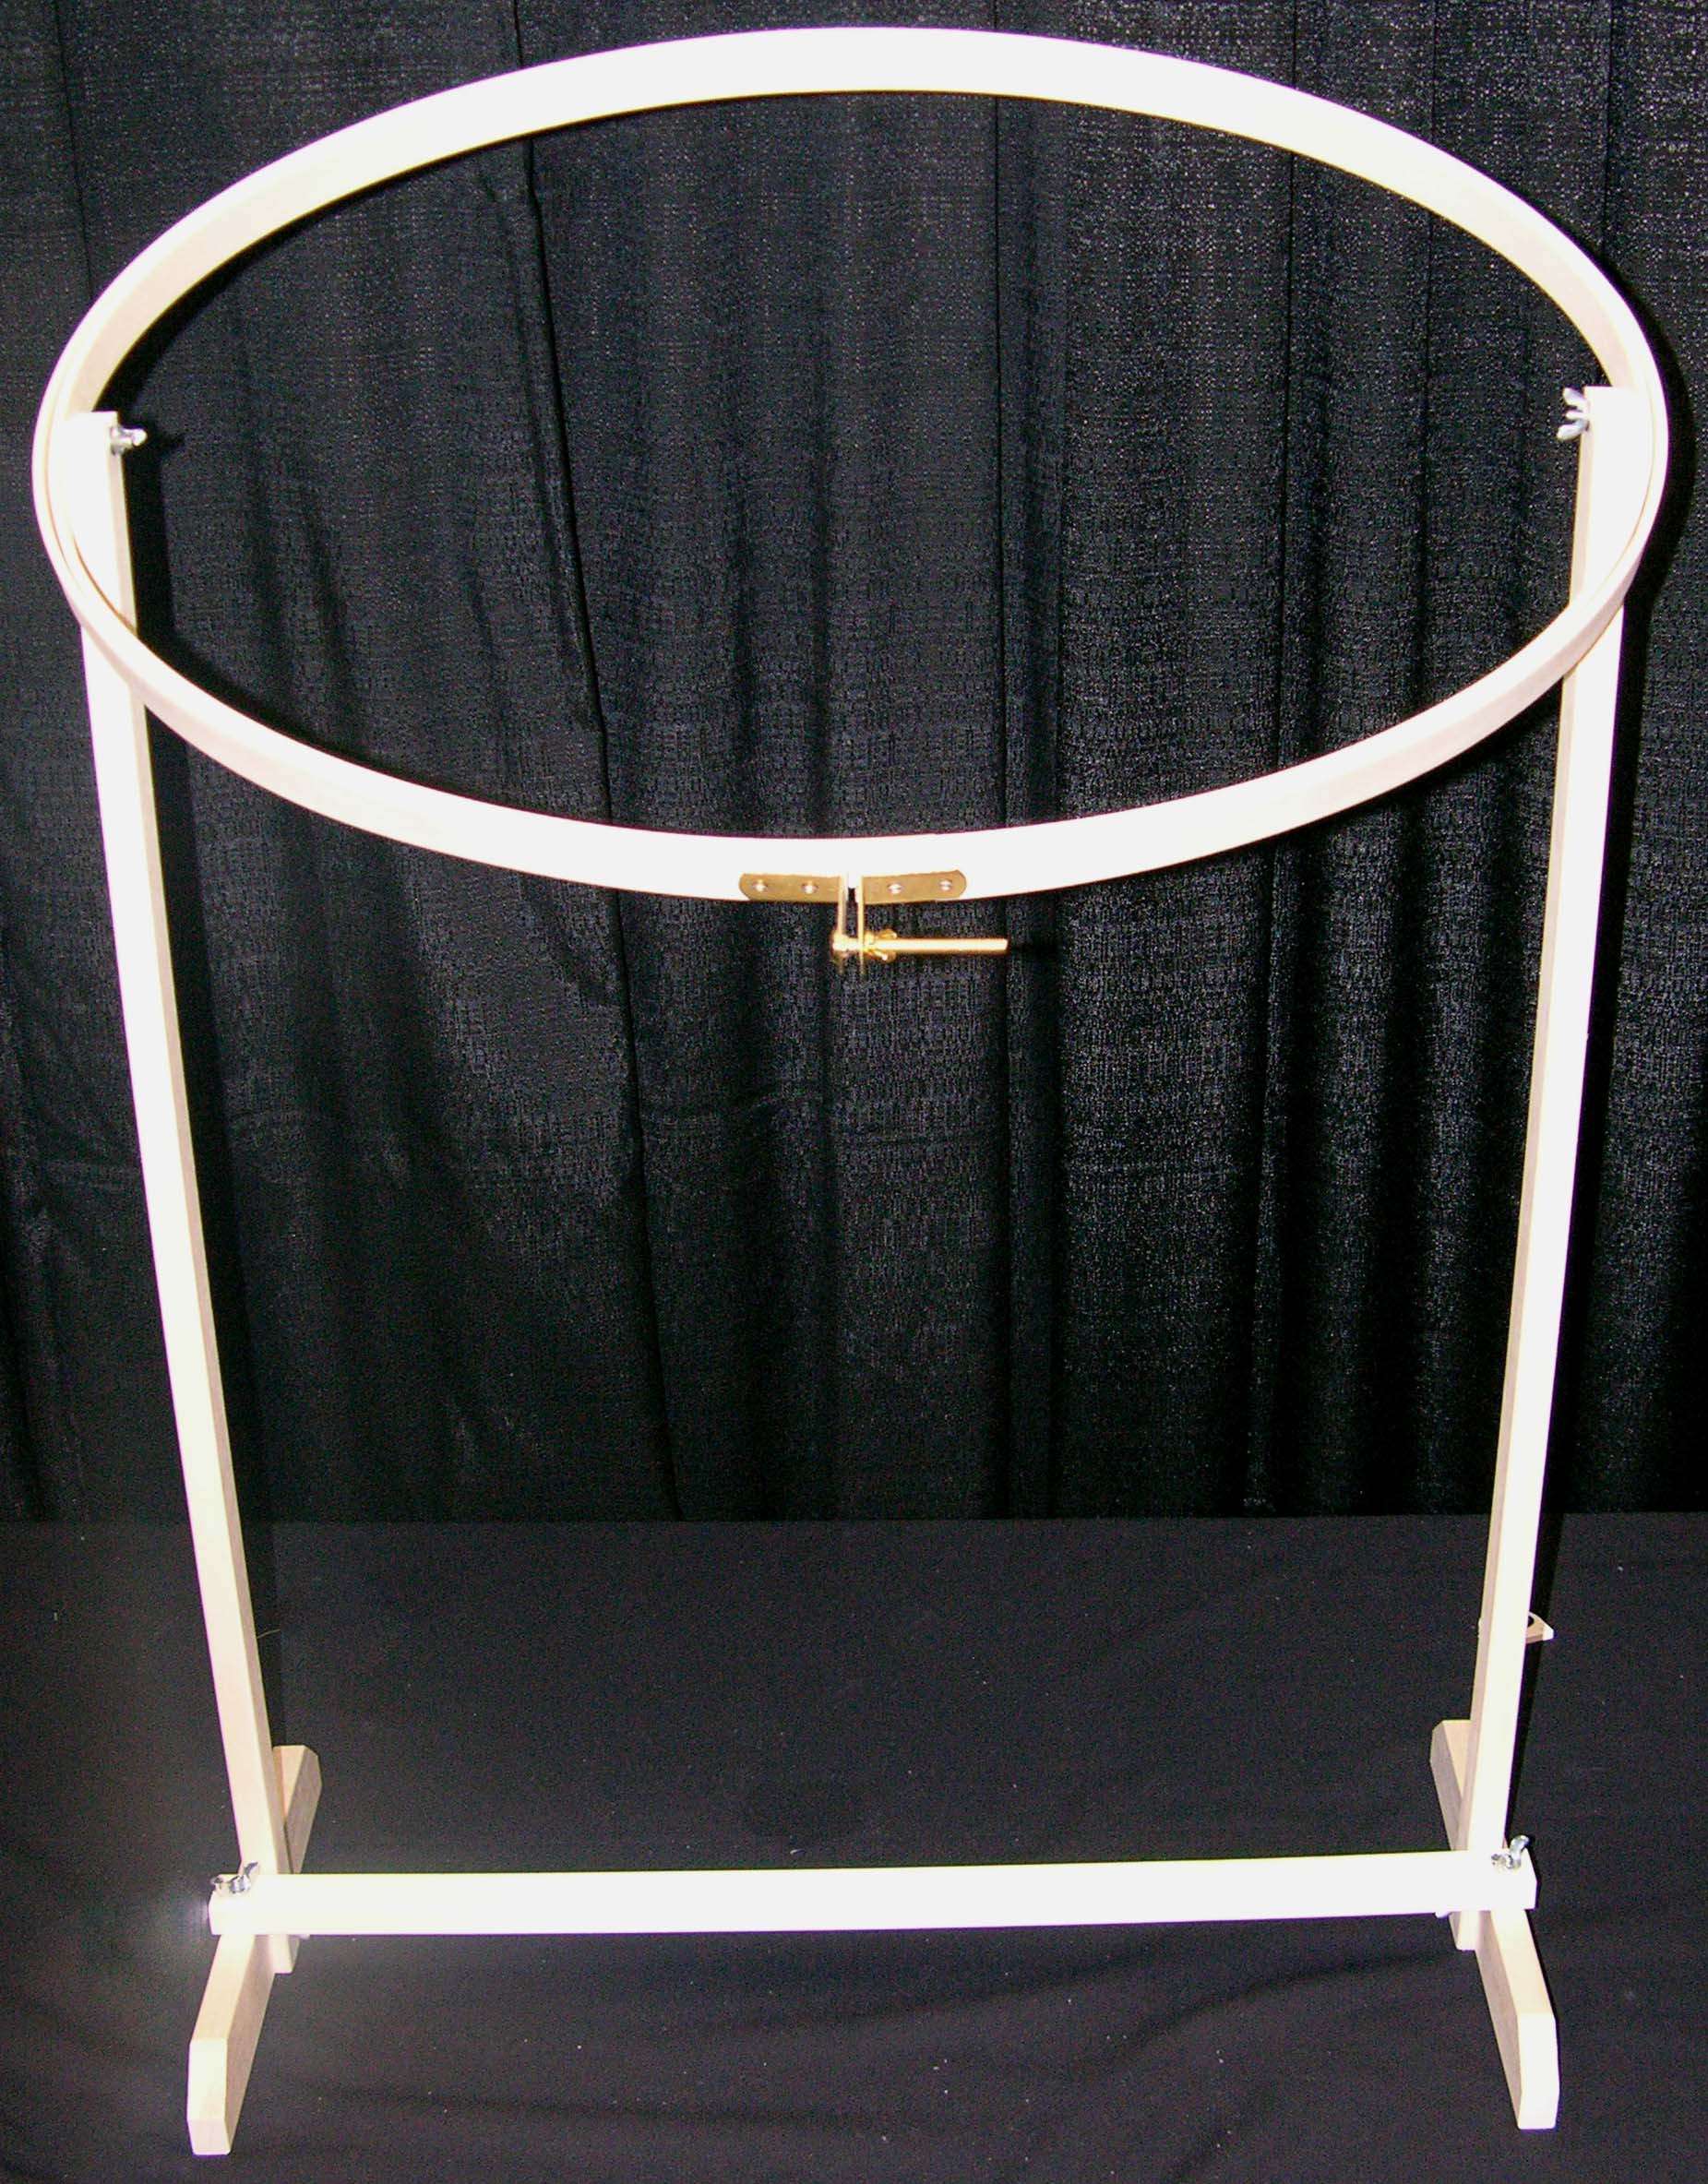 Quilting Hoop With Stand